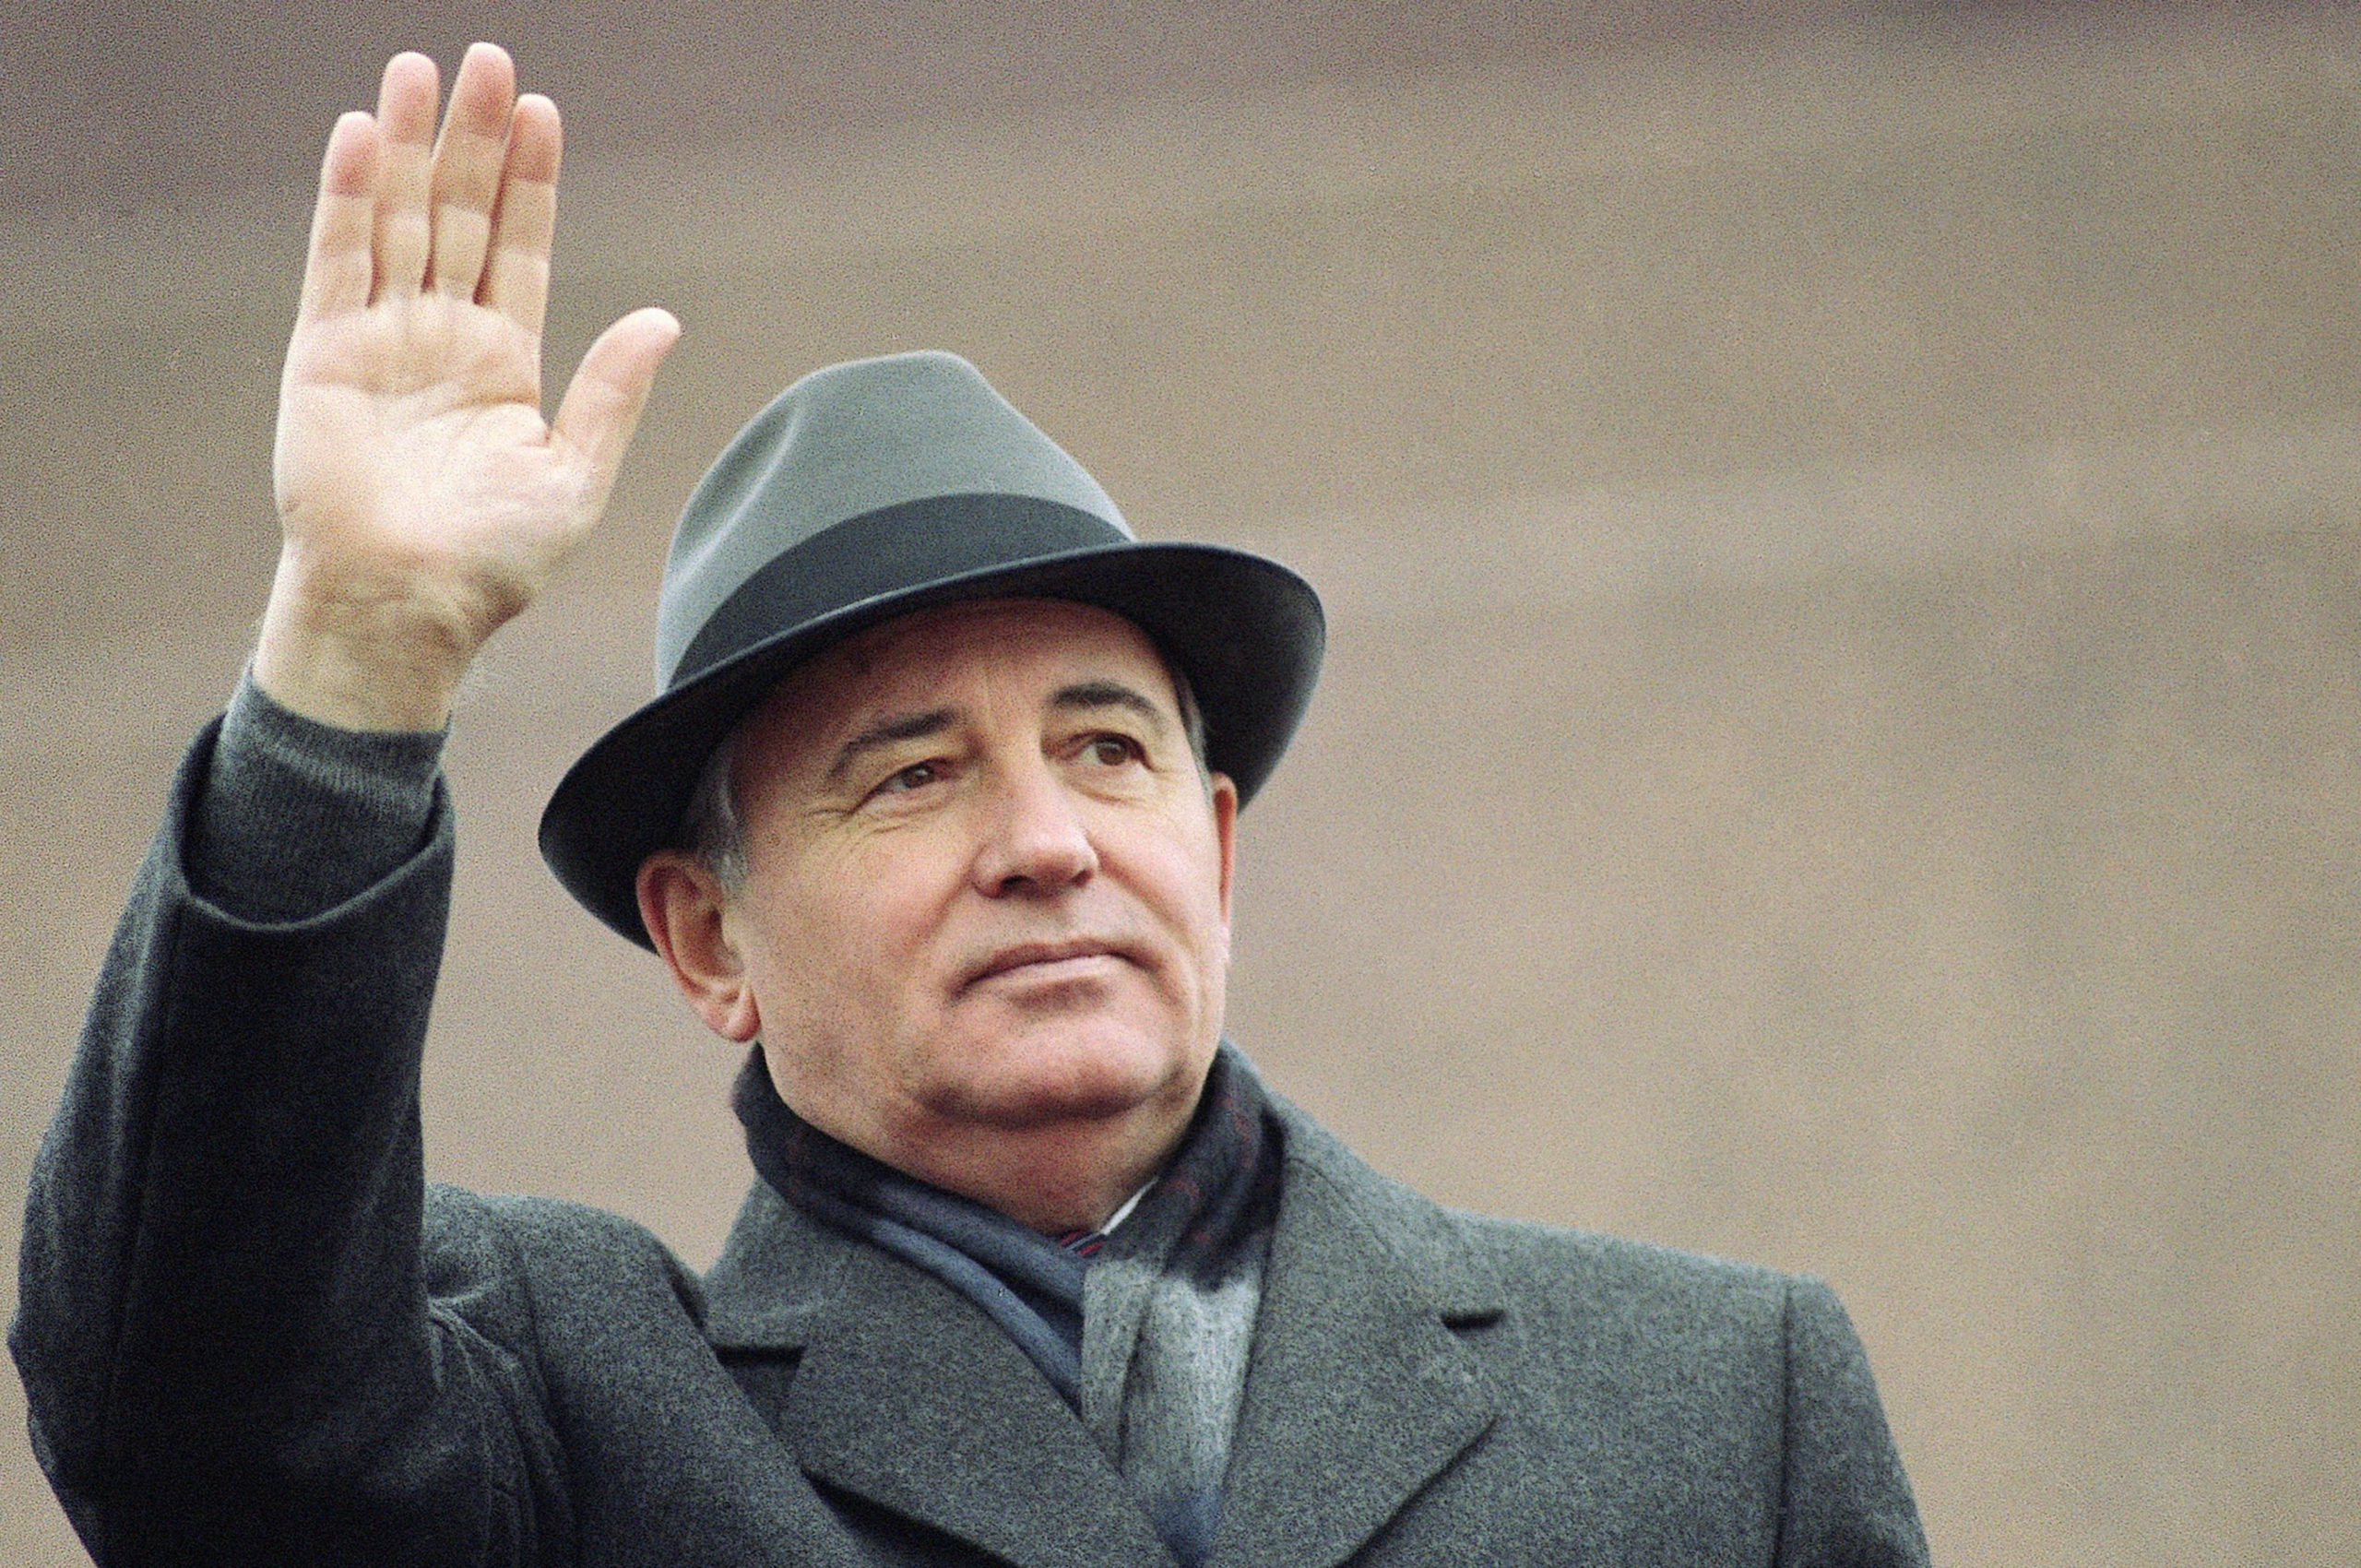 Soviet President Mikhail Gorbachev waves from the Red Square tribune during a Revolution Day celebration, in Moscow, Soviet Union, in a file photo from November 1989. Russian news agencies are reporting that former Gorbachev has died at 91.